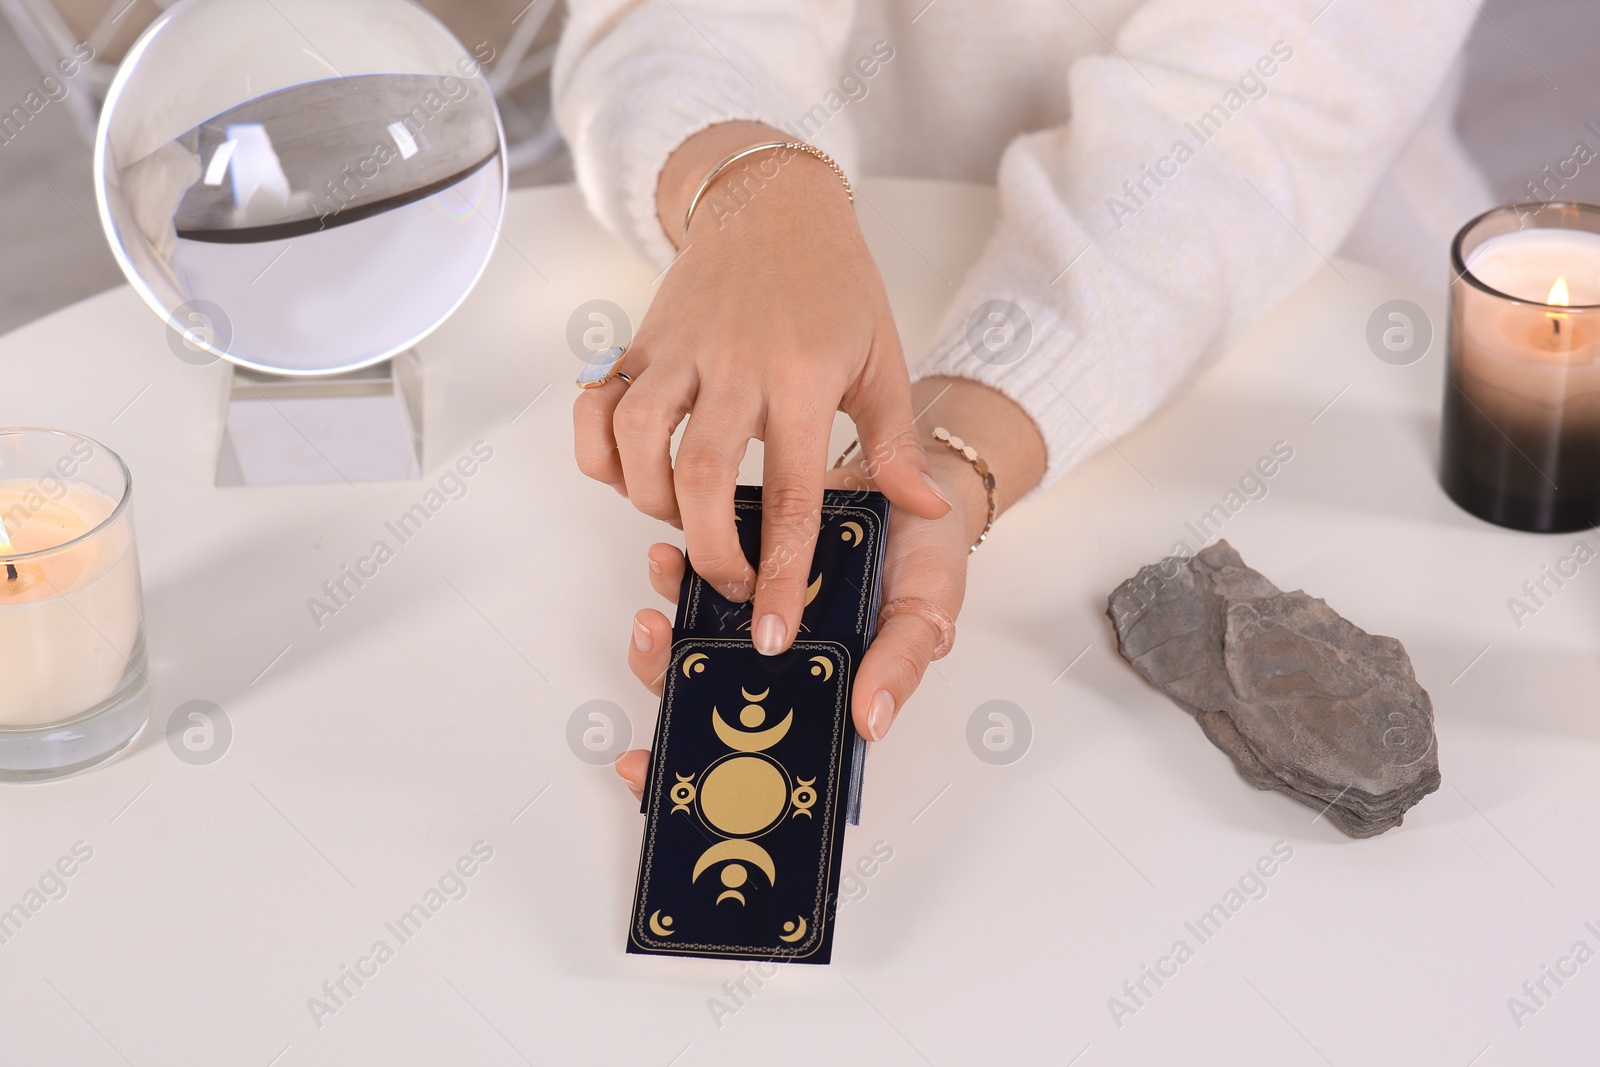 Photo of Soothsayer predicting future with tarot cards at table indoors, closeup